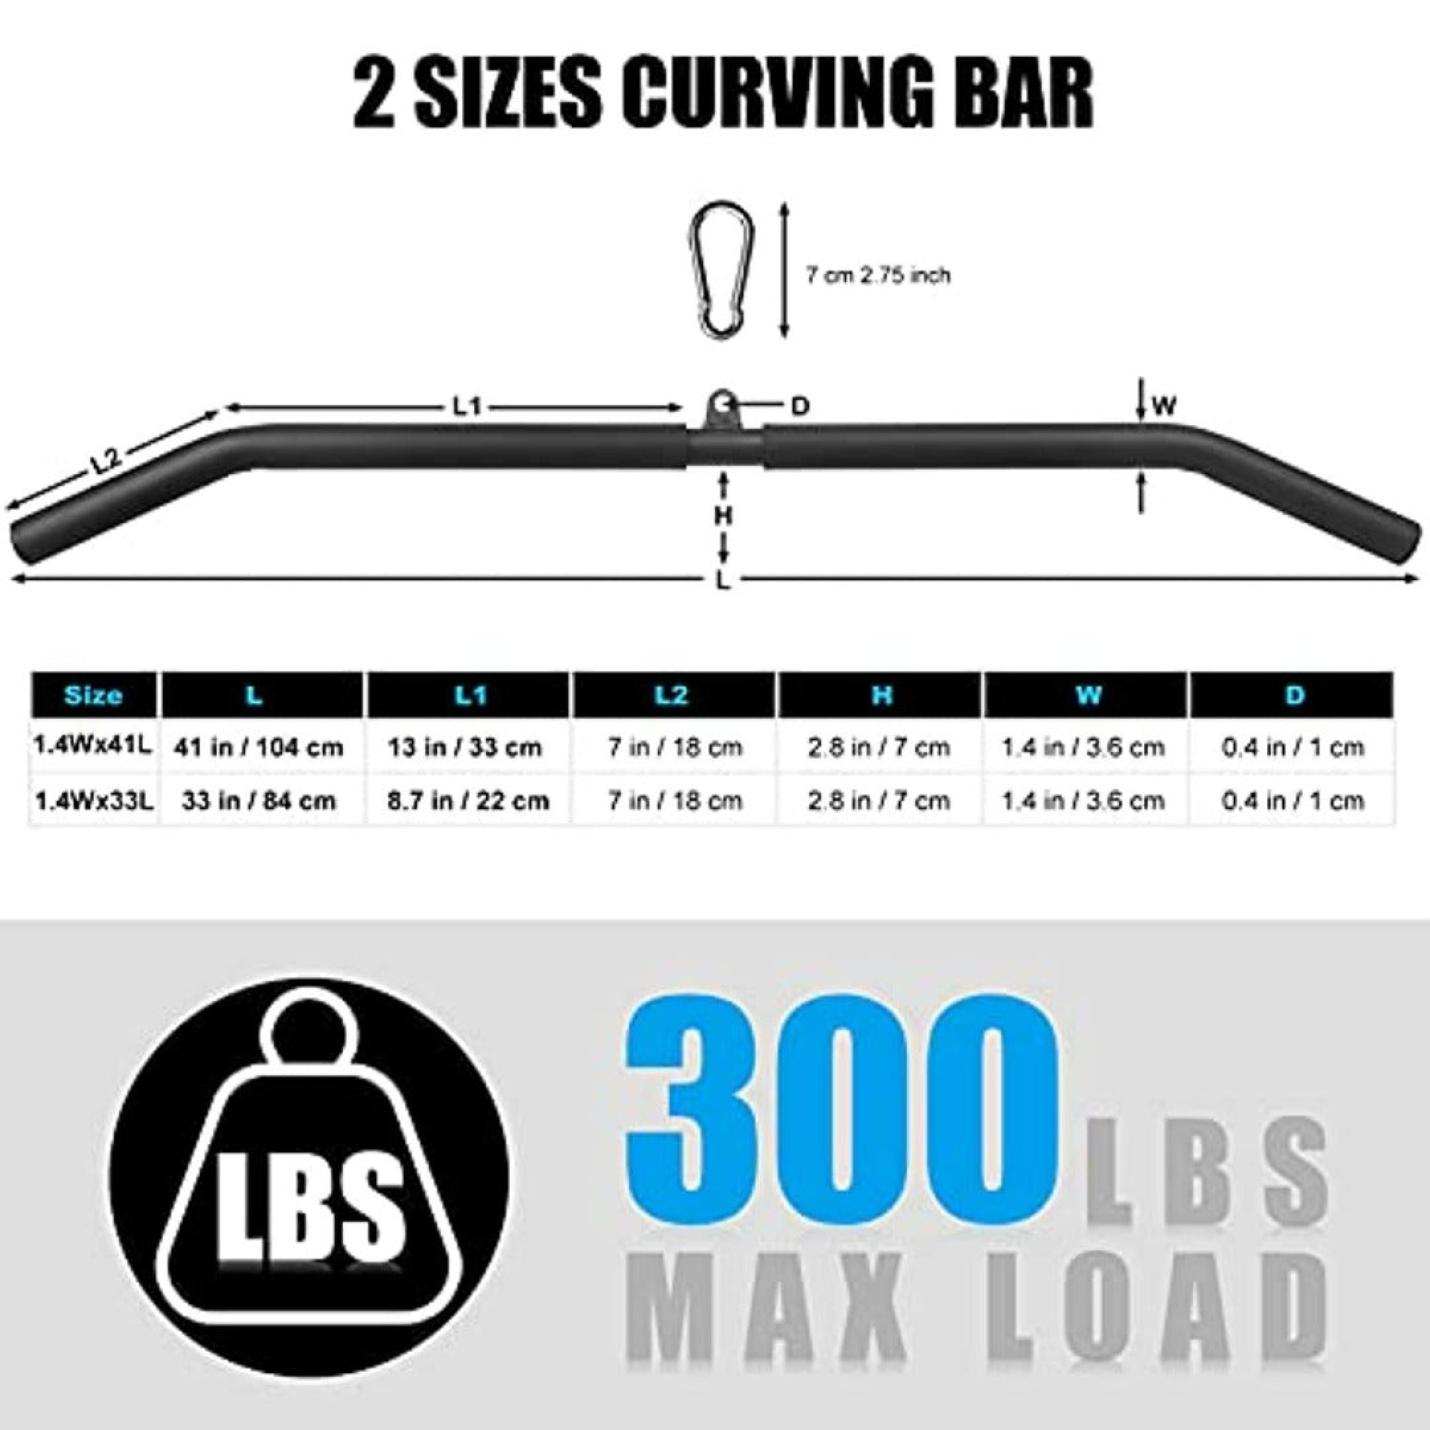 Durable lat pulldown bar for triceps and back muscles, 104cm length, thicker cable machine, curved design, perfect for gym and professional fitness